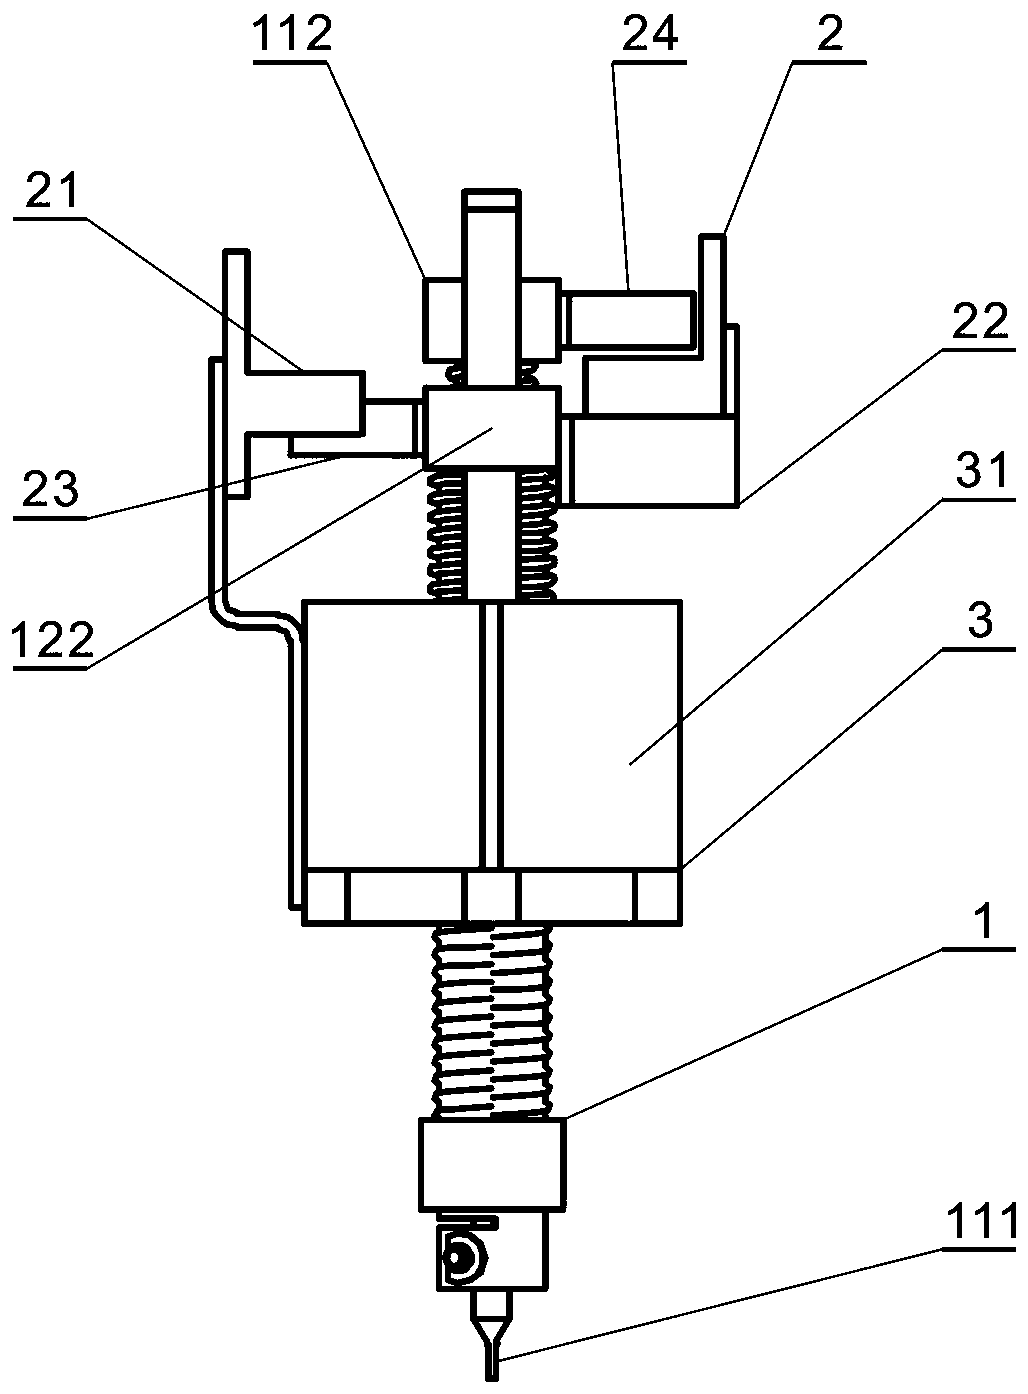 A test device for connector insertion force